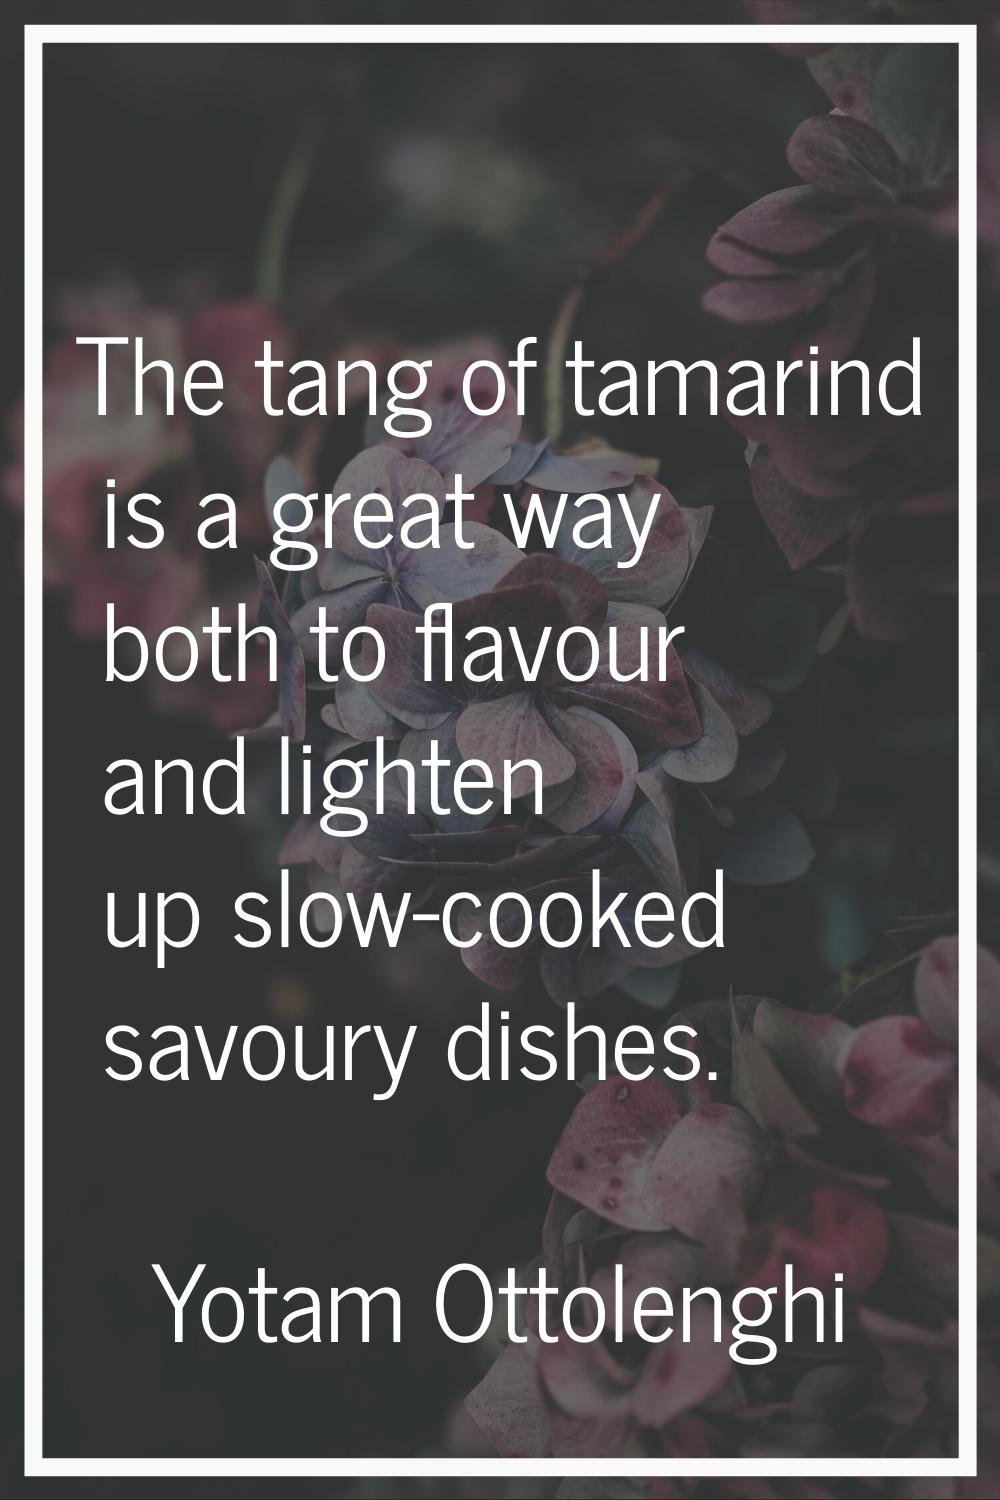 The tang of tamarind is a great way both to flavour and lighten up slow-cooked savoury dishes.